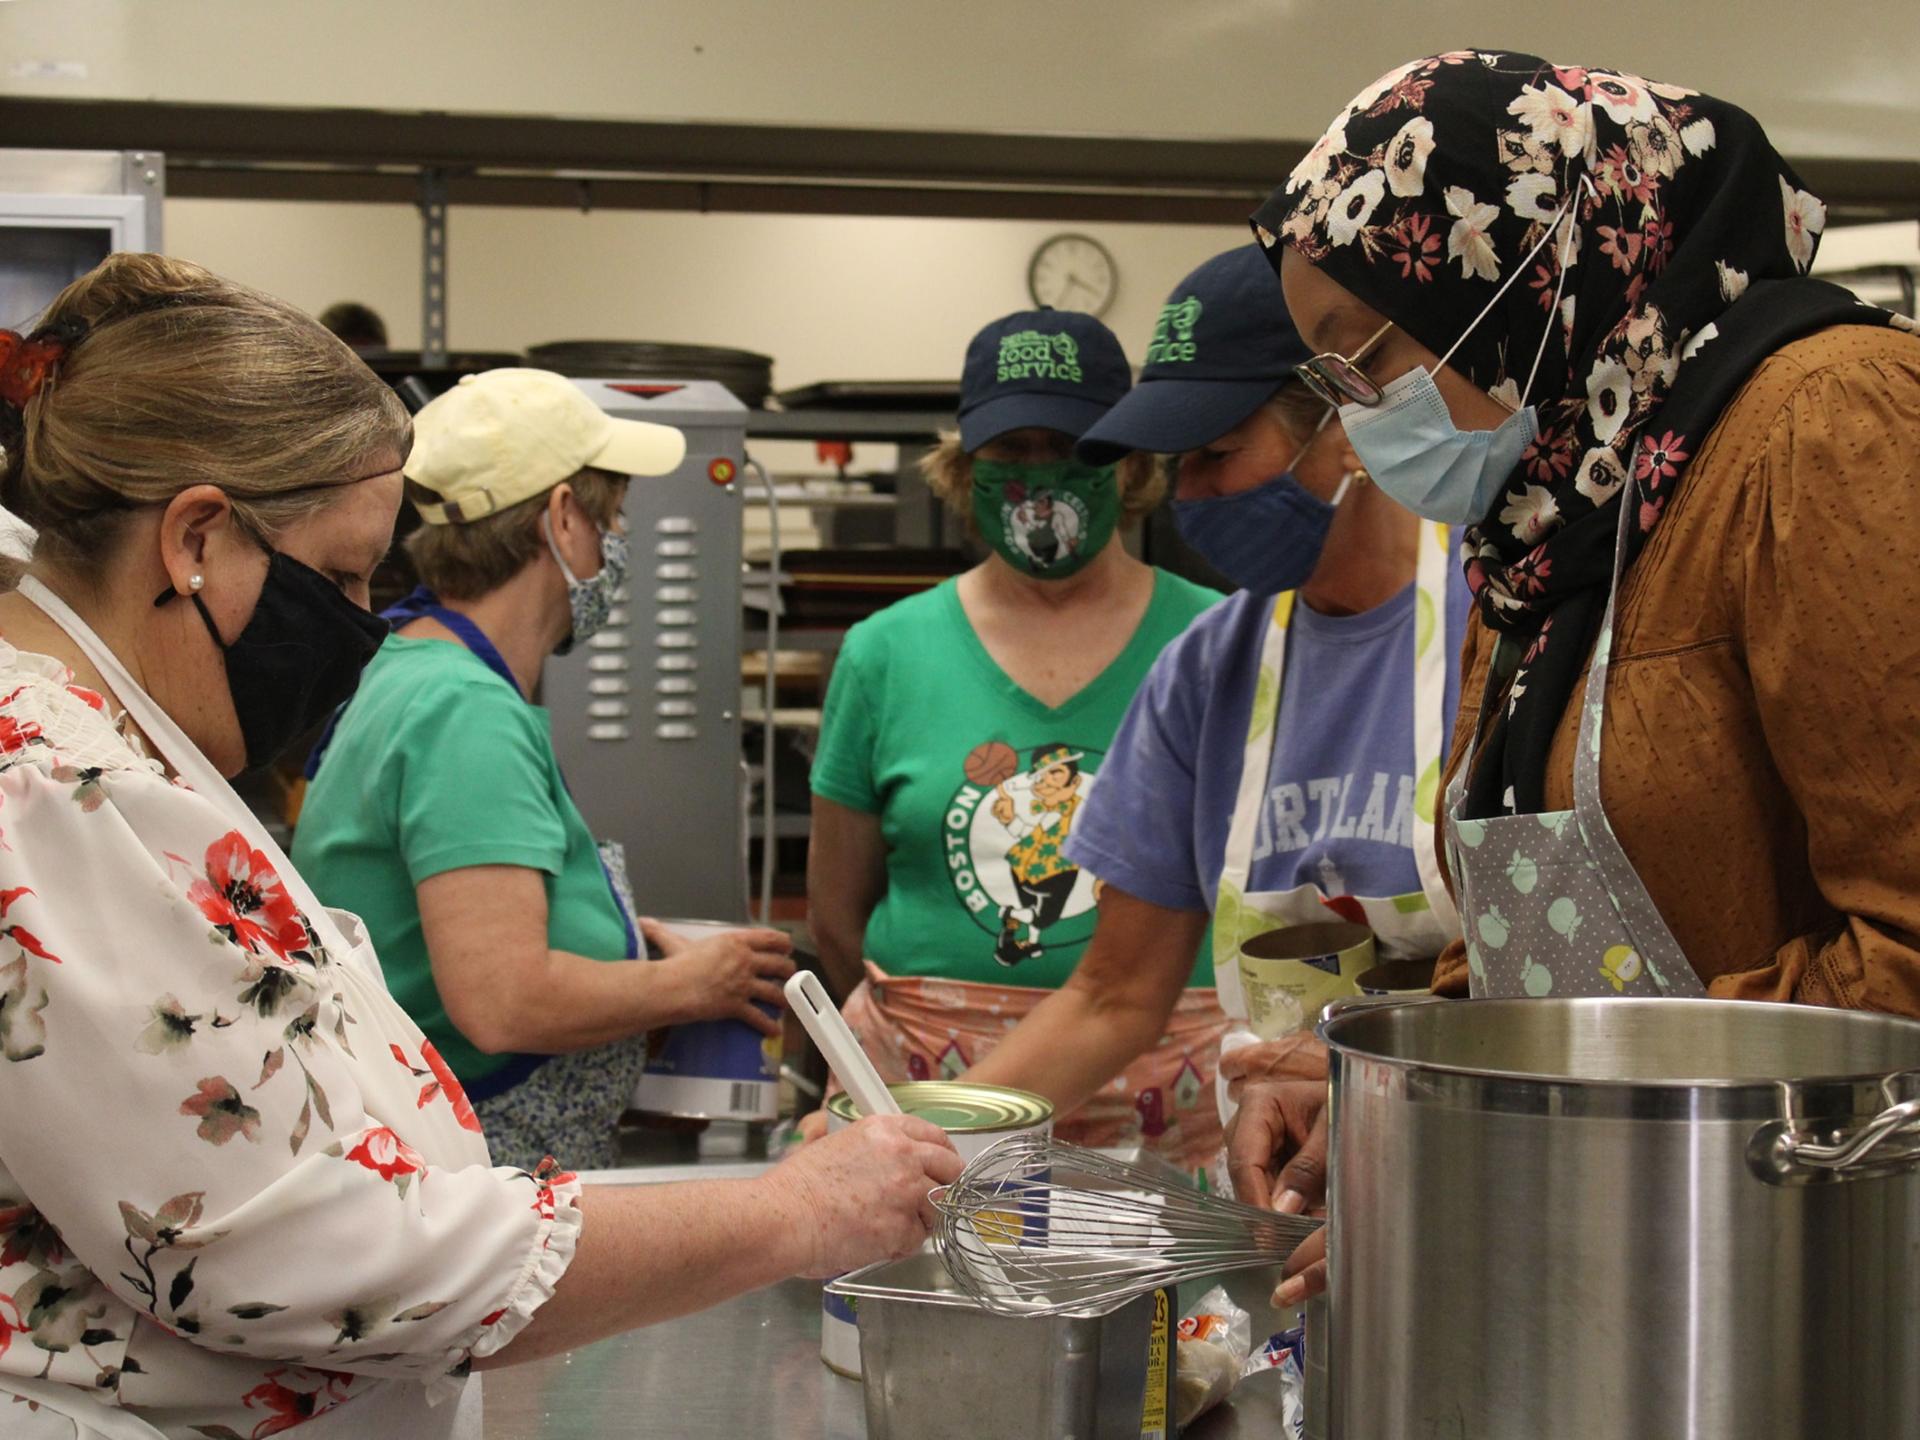 Khadija Ahmed, right, shows Portland Public Schools’ Food Service Director Jane McLucas how to make a sweet grits pudding, while district food service staff look on.